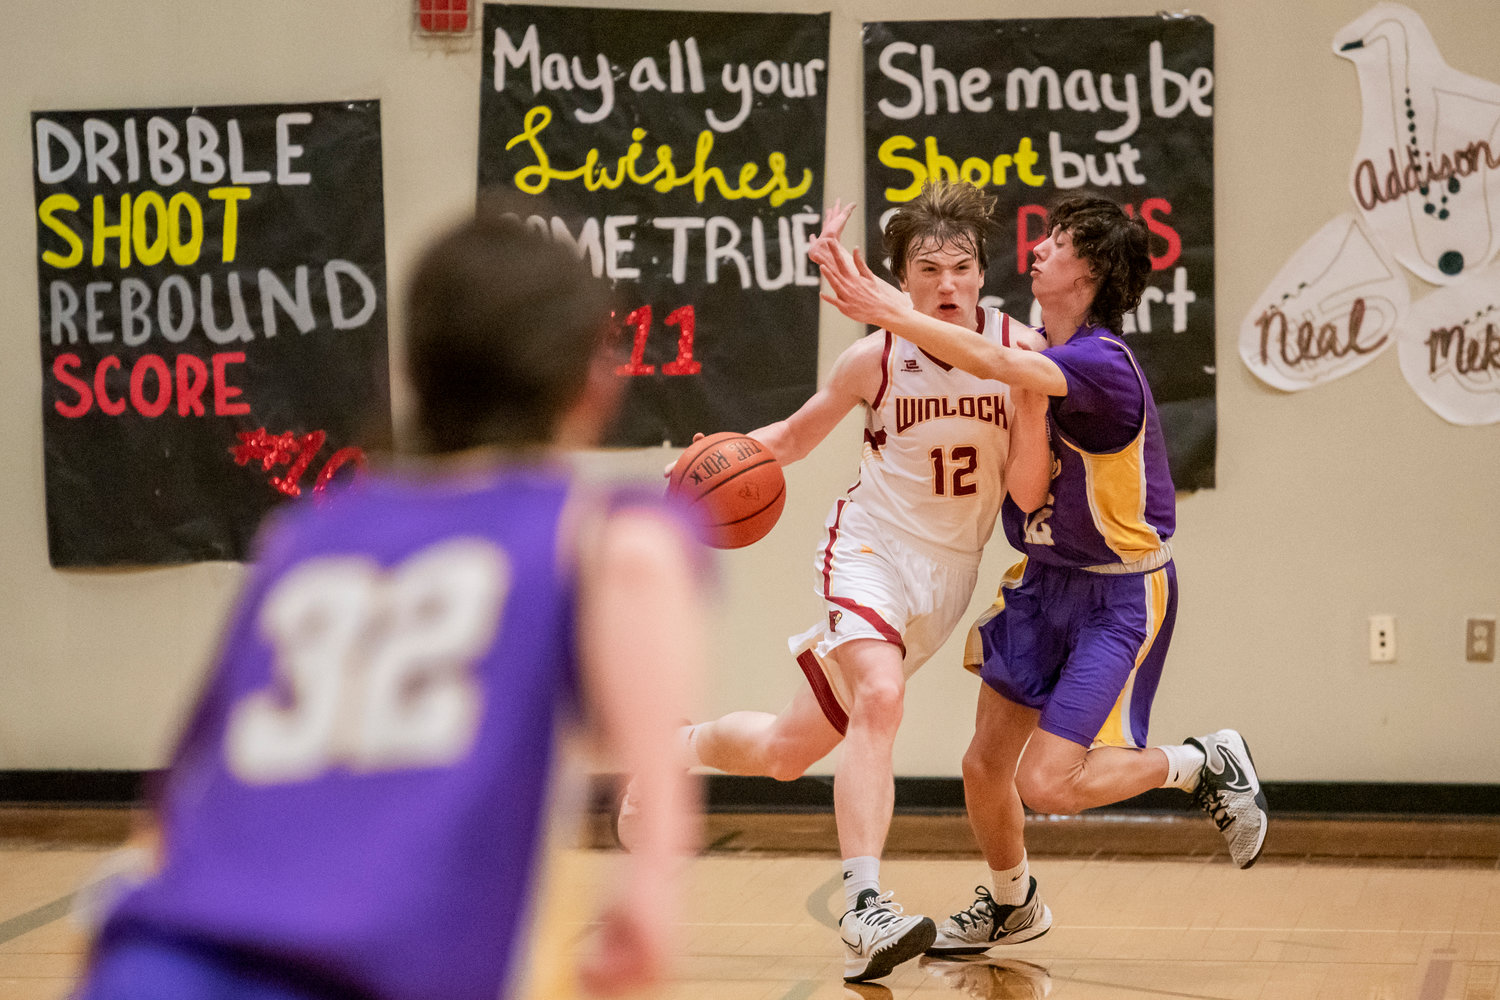 Winlock’s Chase Scofield (12) dribbles the ball as Loggers defend Friday night during a game.